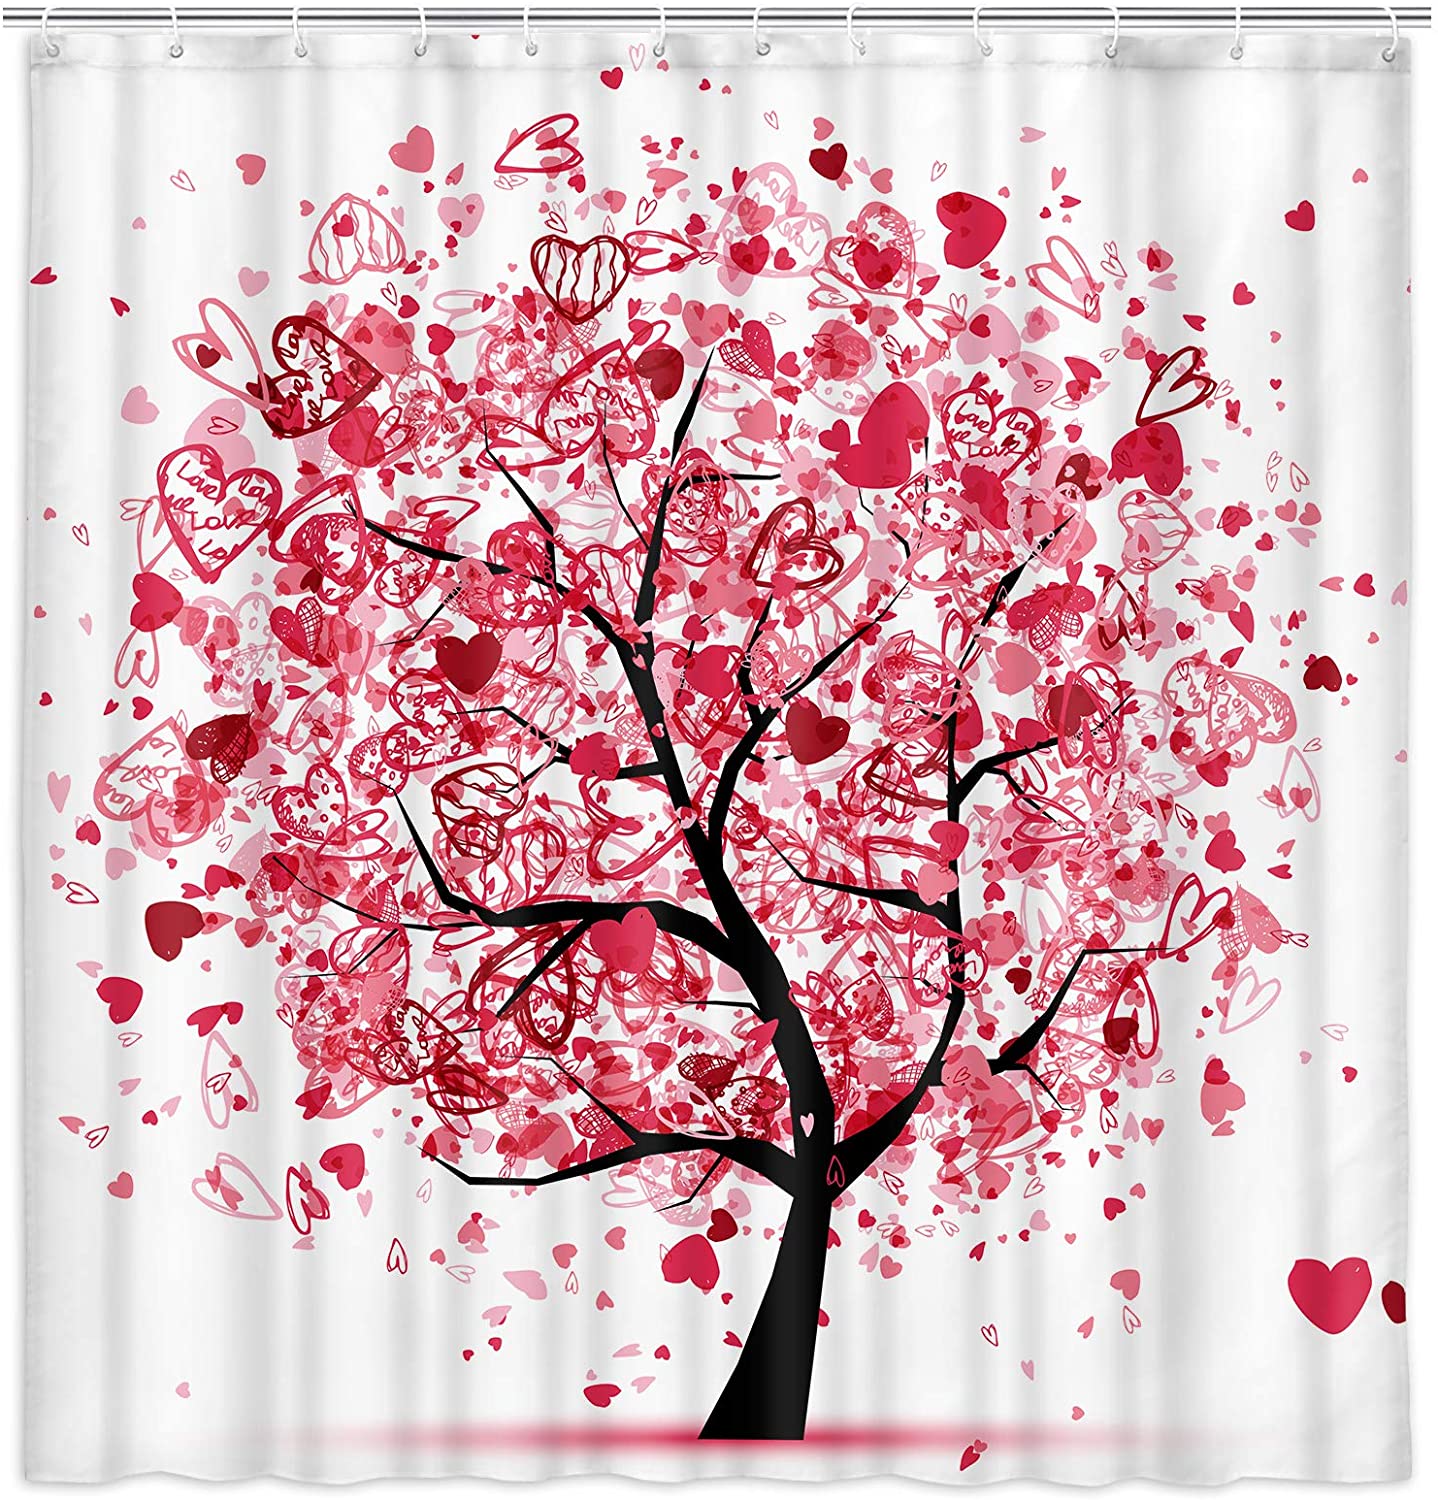 Ordinary Discount Avigers Cushion Cover - Tree of Life Shower Curtain for Bathroom Valentines Tree with Pink Hearts Doodles Decorated Shower Curtain Fabric Bathroom Curtain – DAIRUI